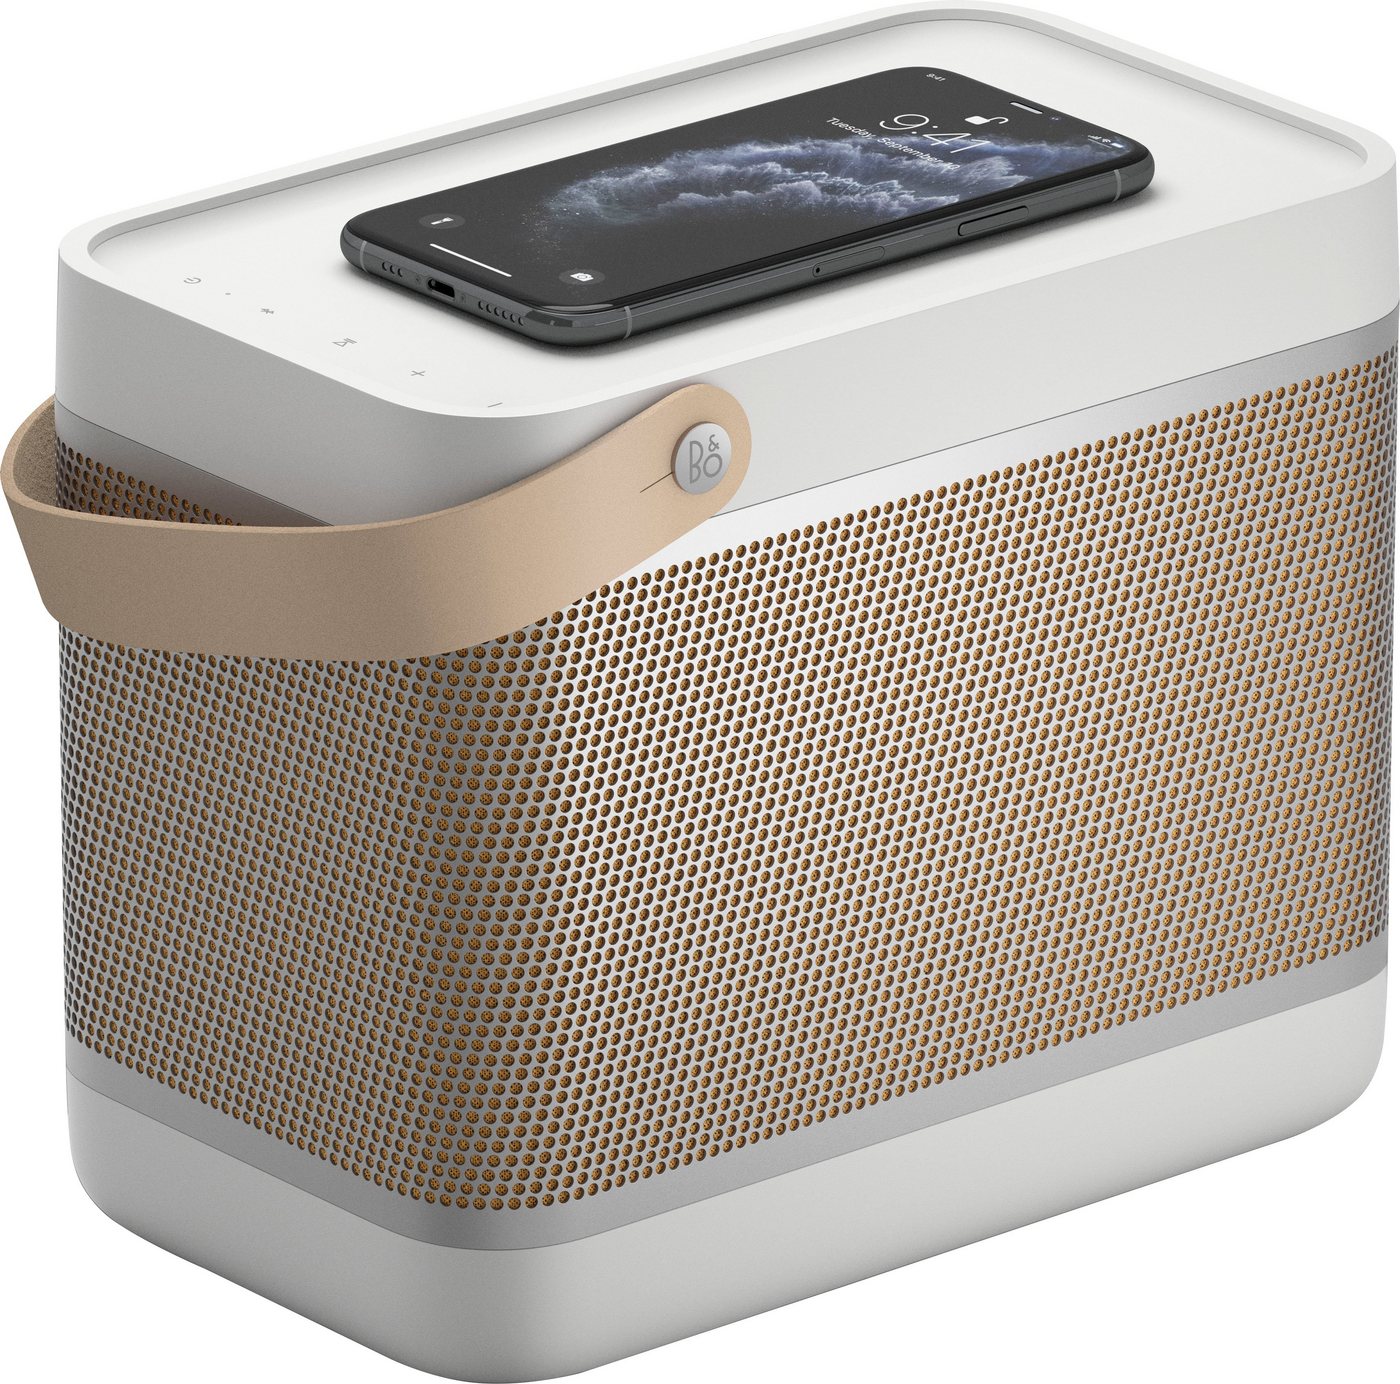 Bang & Olufsen Beolit 20 Stereo Bluetooth-Lautsprecher (Bluetooth) von Bang & Olufsen